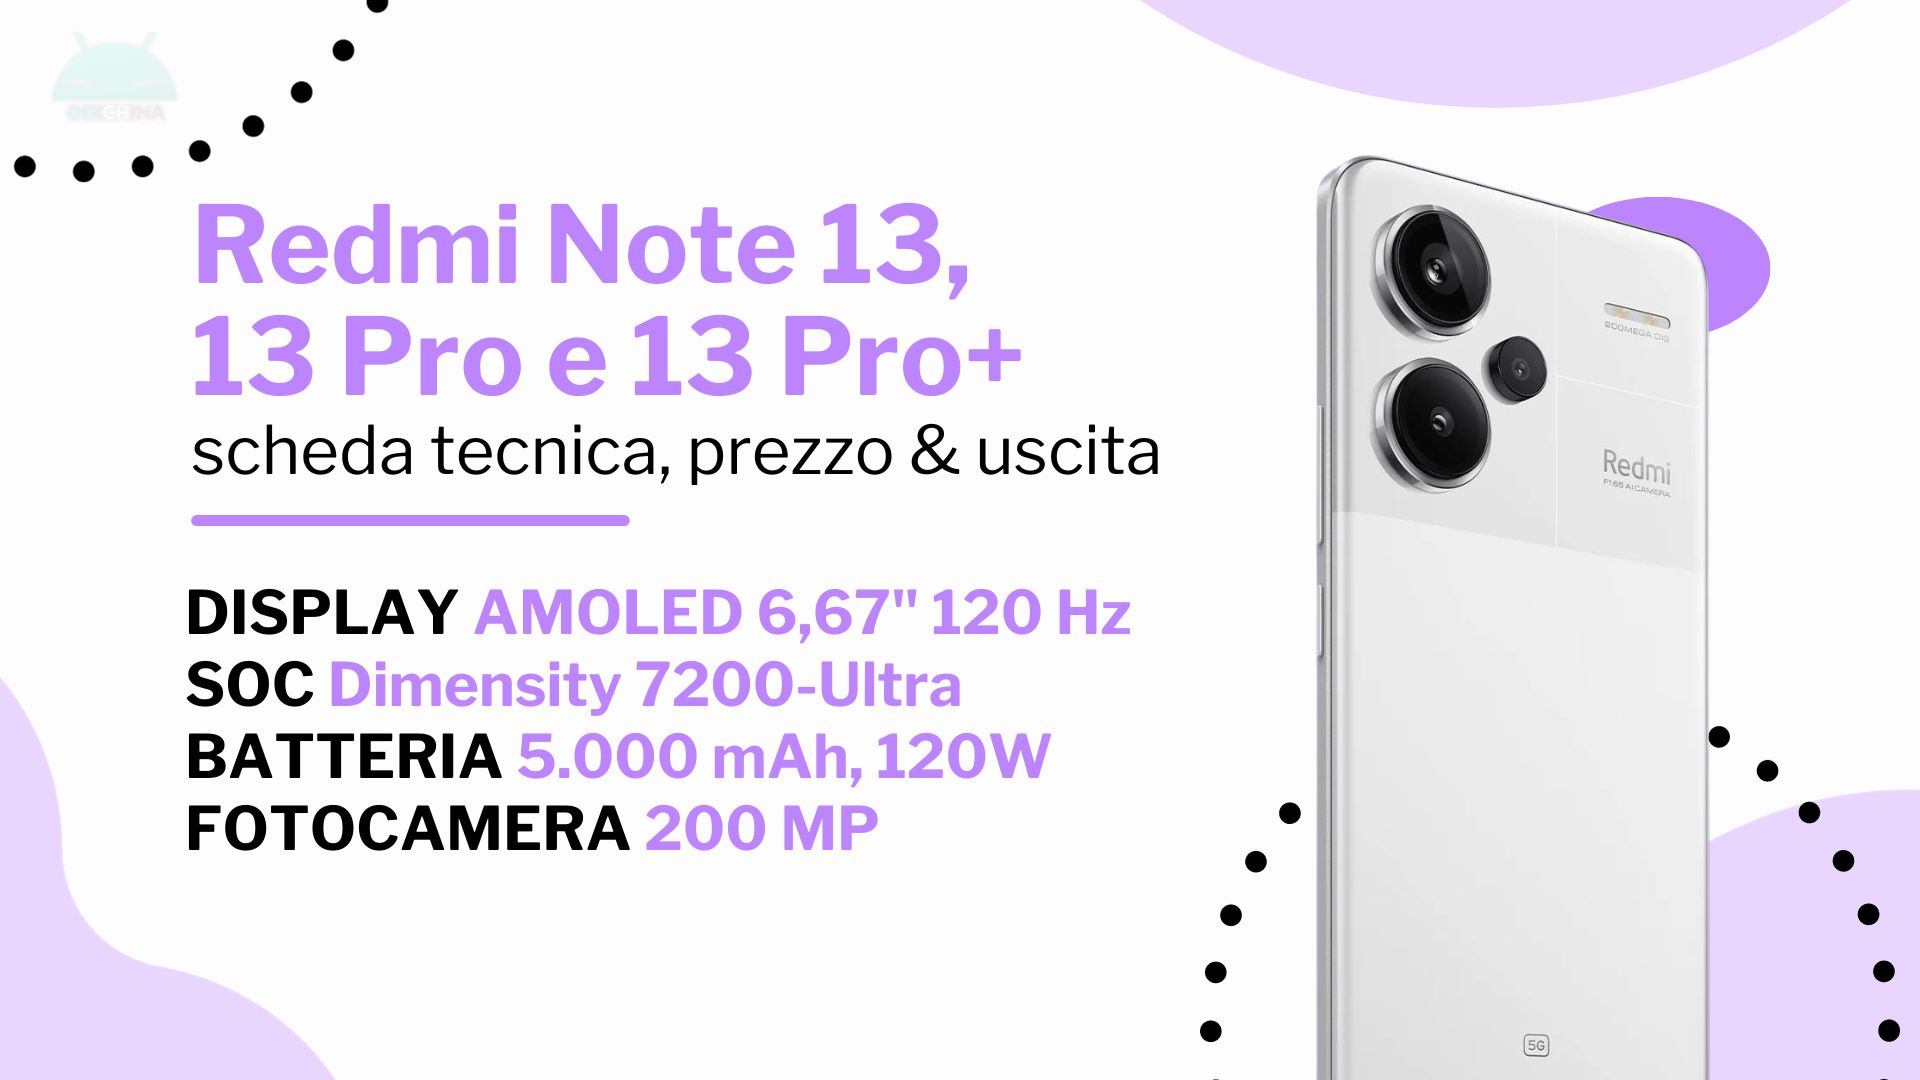 Xiaomi Redmi Note 13 Pro Plus launching for as little as €449 in